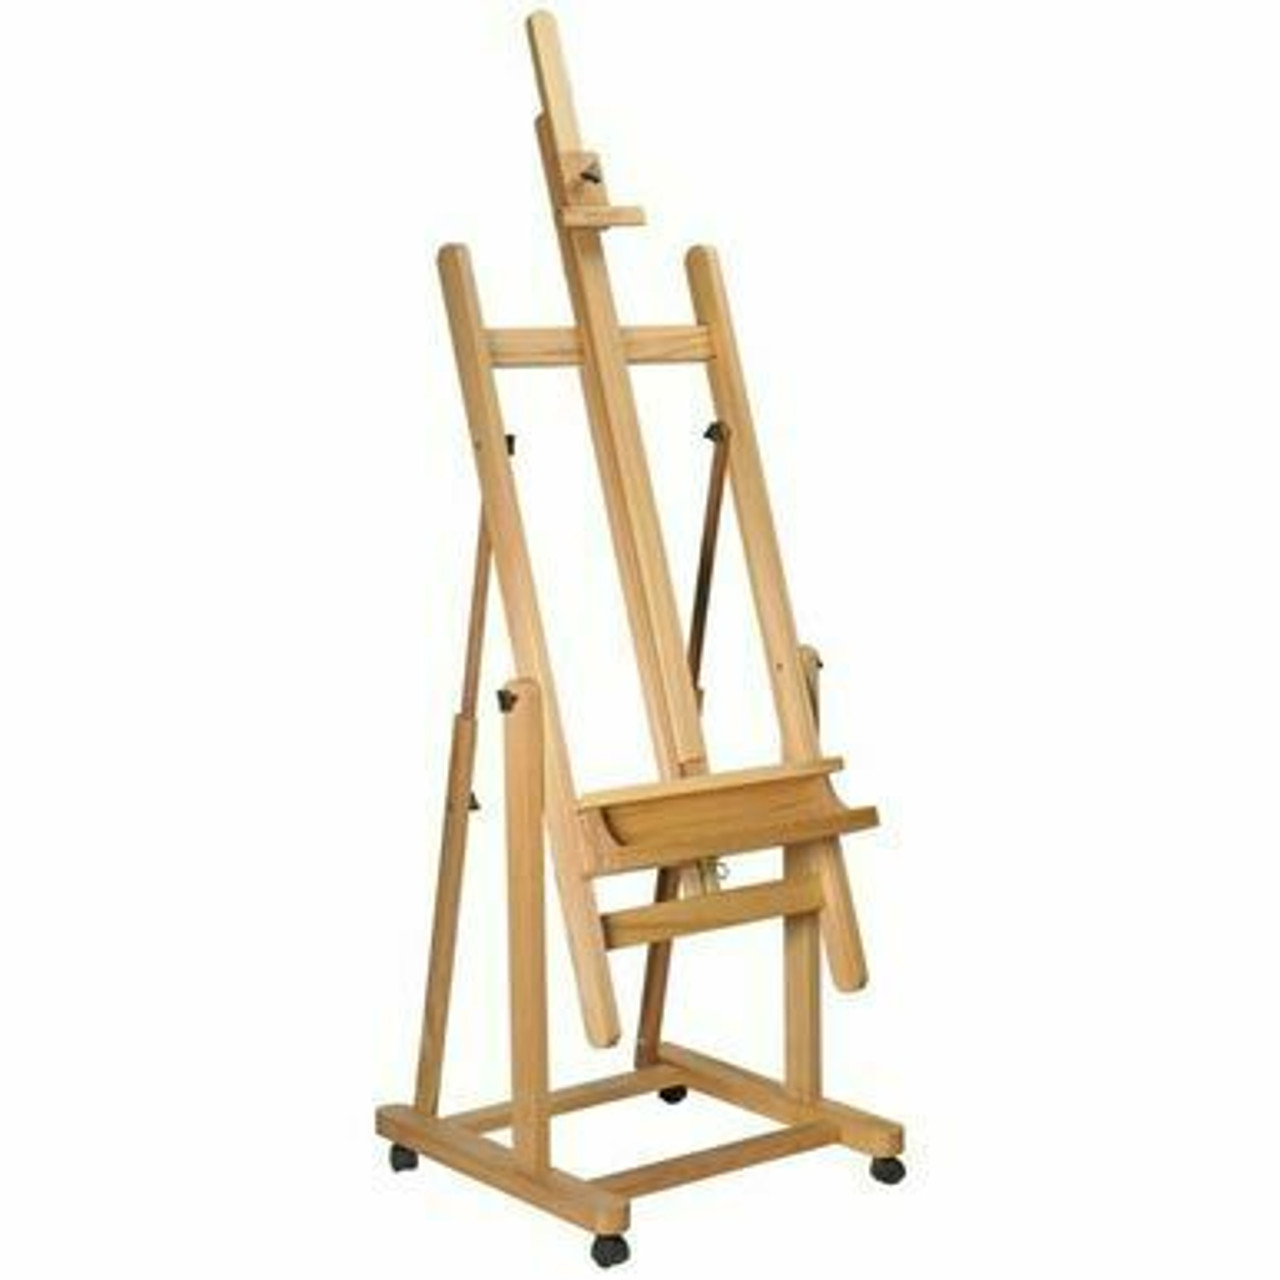 Montmarte Studio Easel with casters